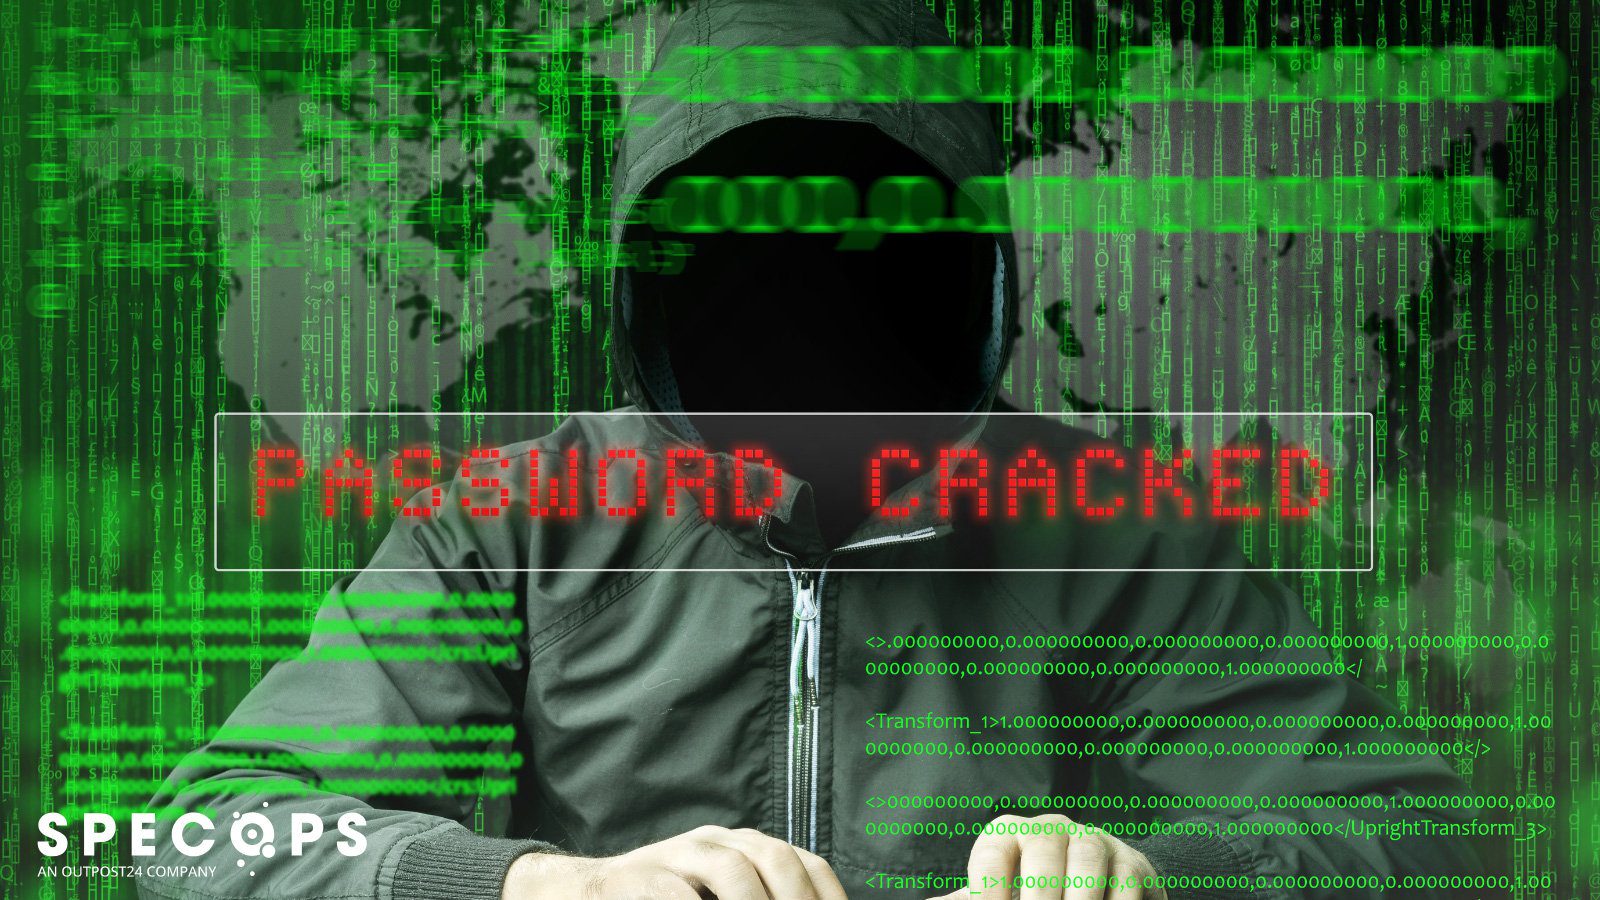 Top 5 Password Cracking Techniques Used by Hackers – Source: www.bleepingcomputer.com